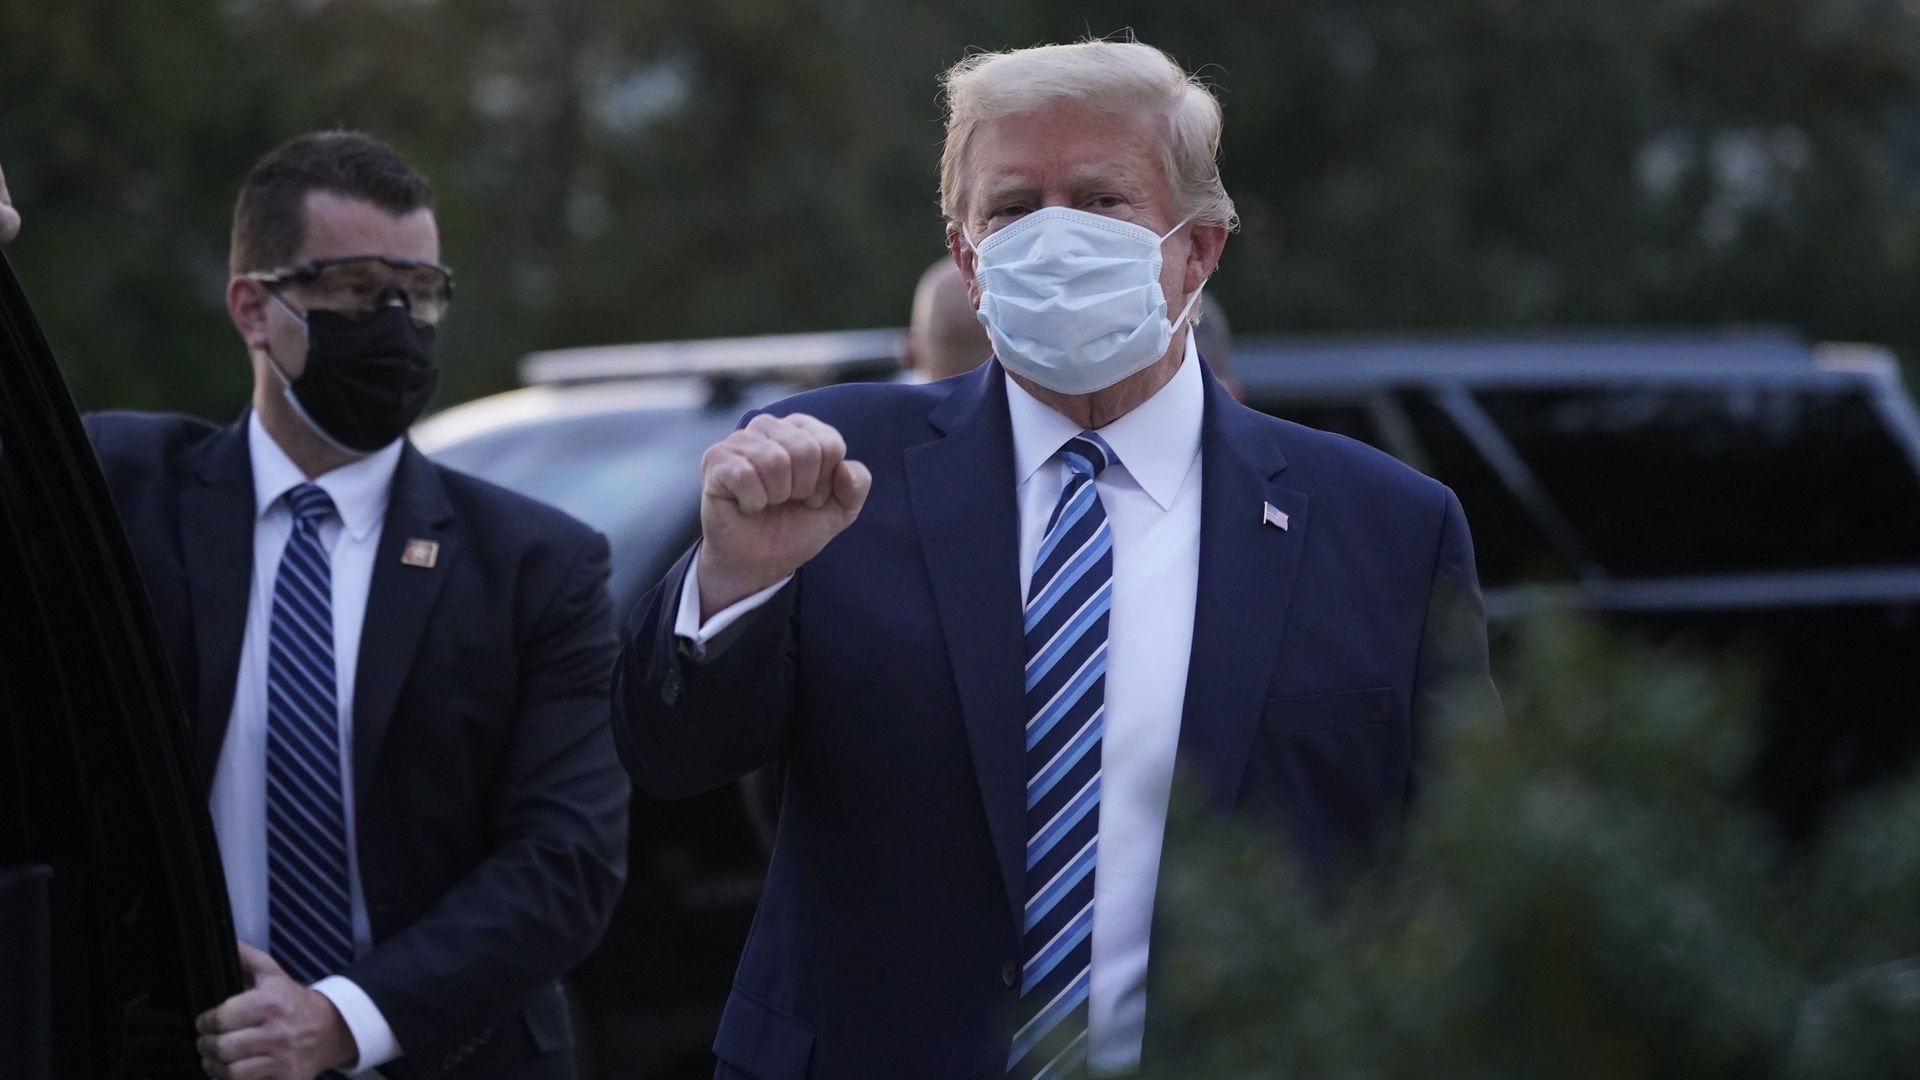 Donald Trump wearing a surgical mask